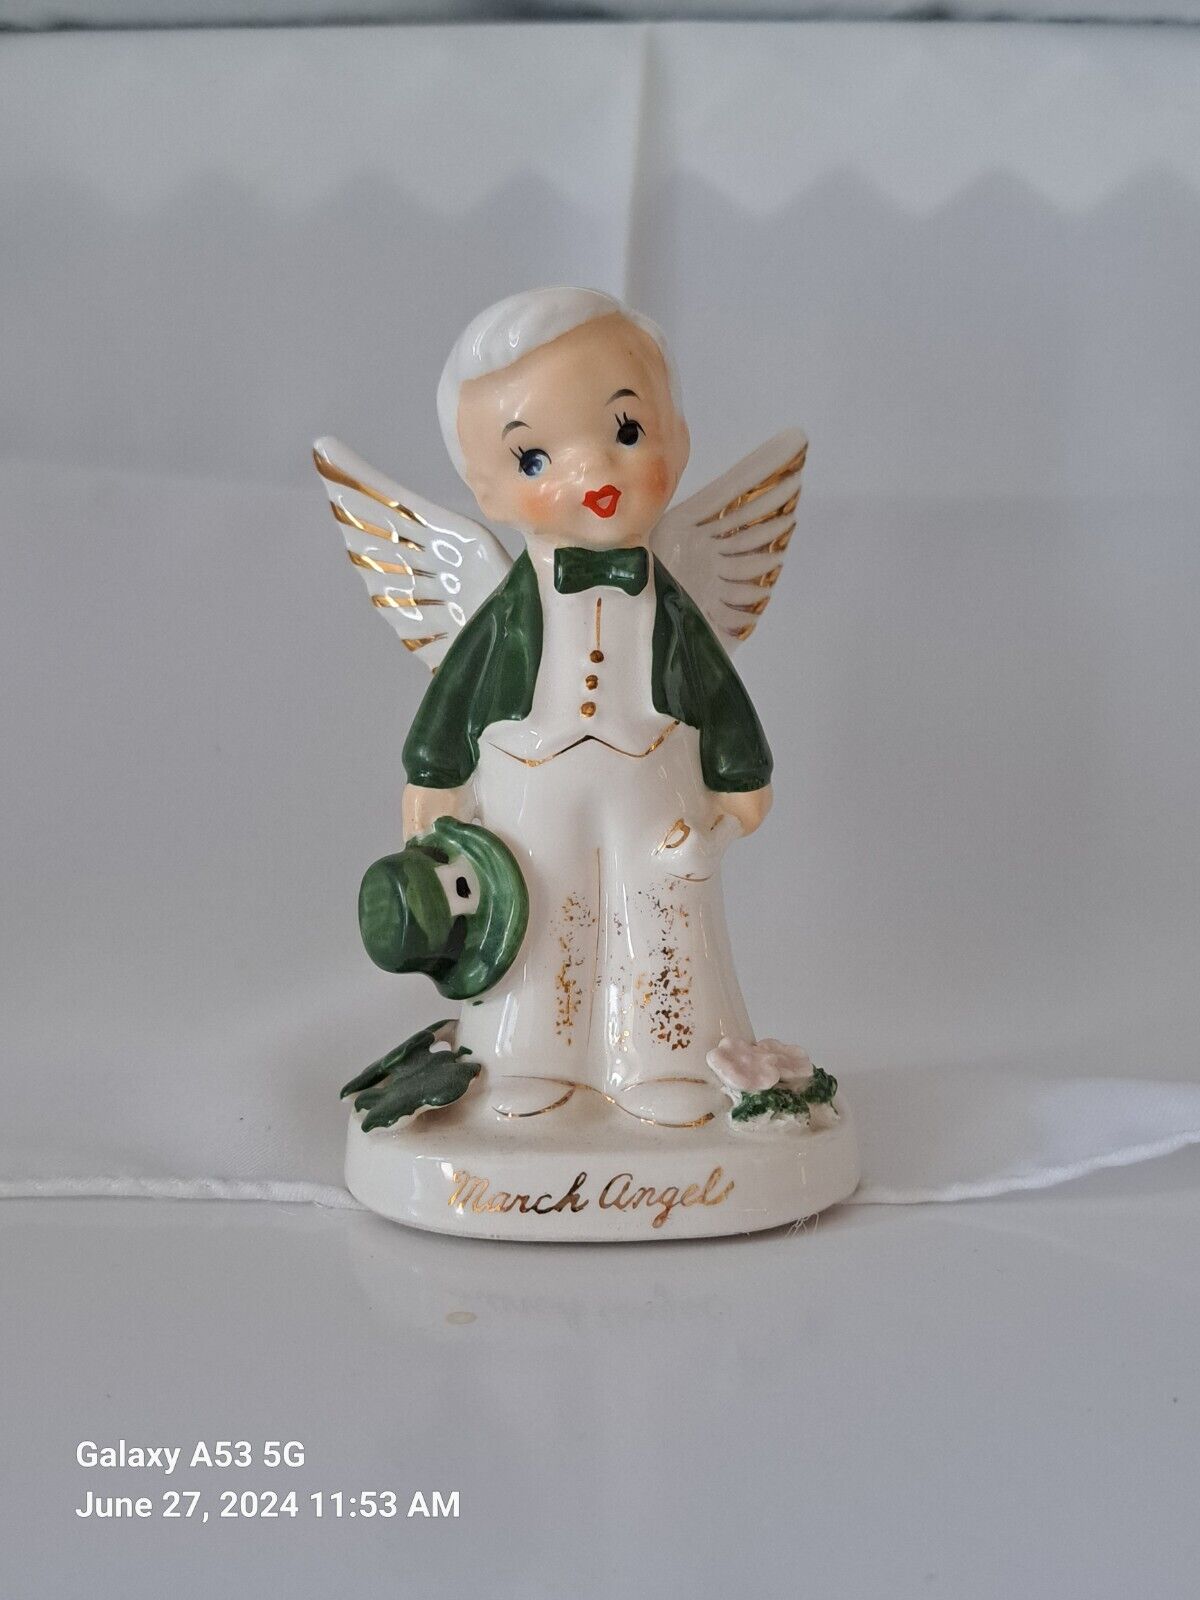 Vintage Napco March Boy Angel of the Month Figurine A1919 Year 1956 